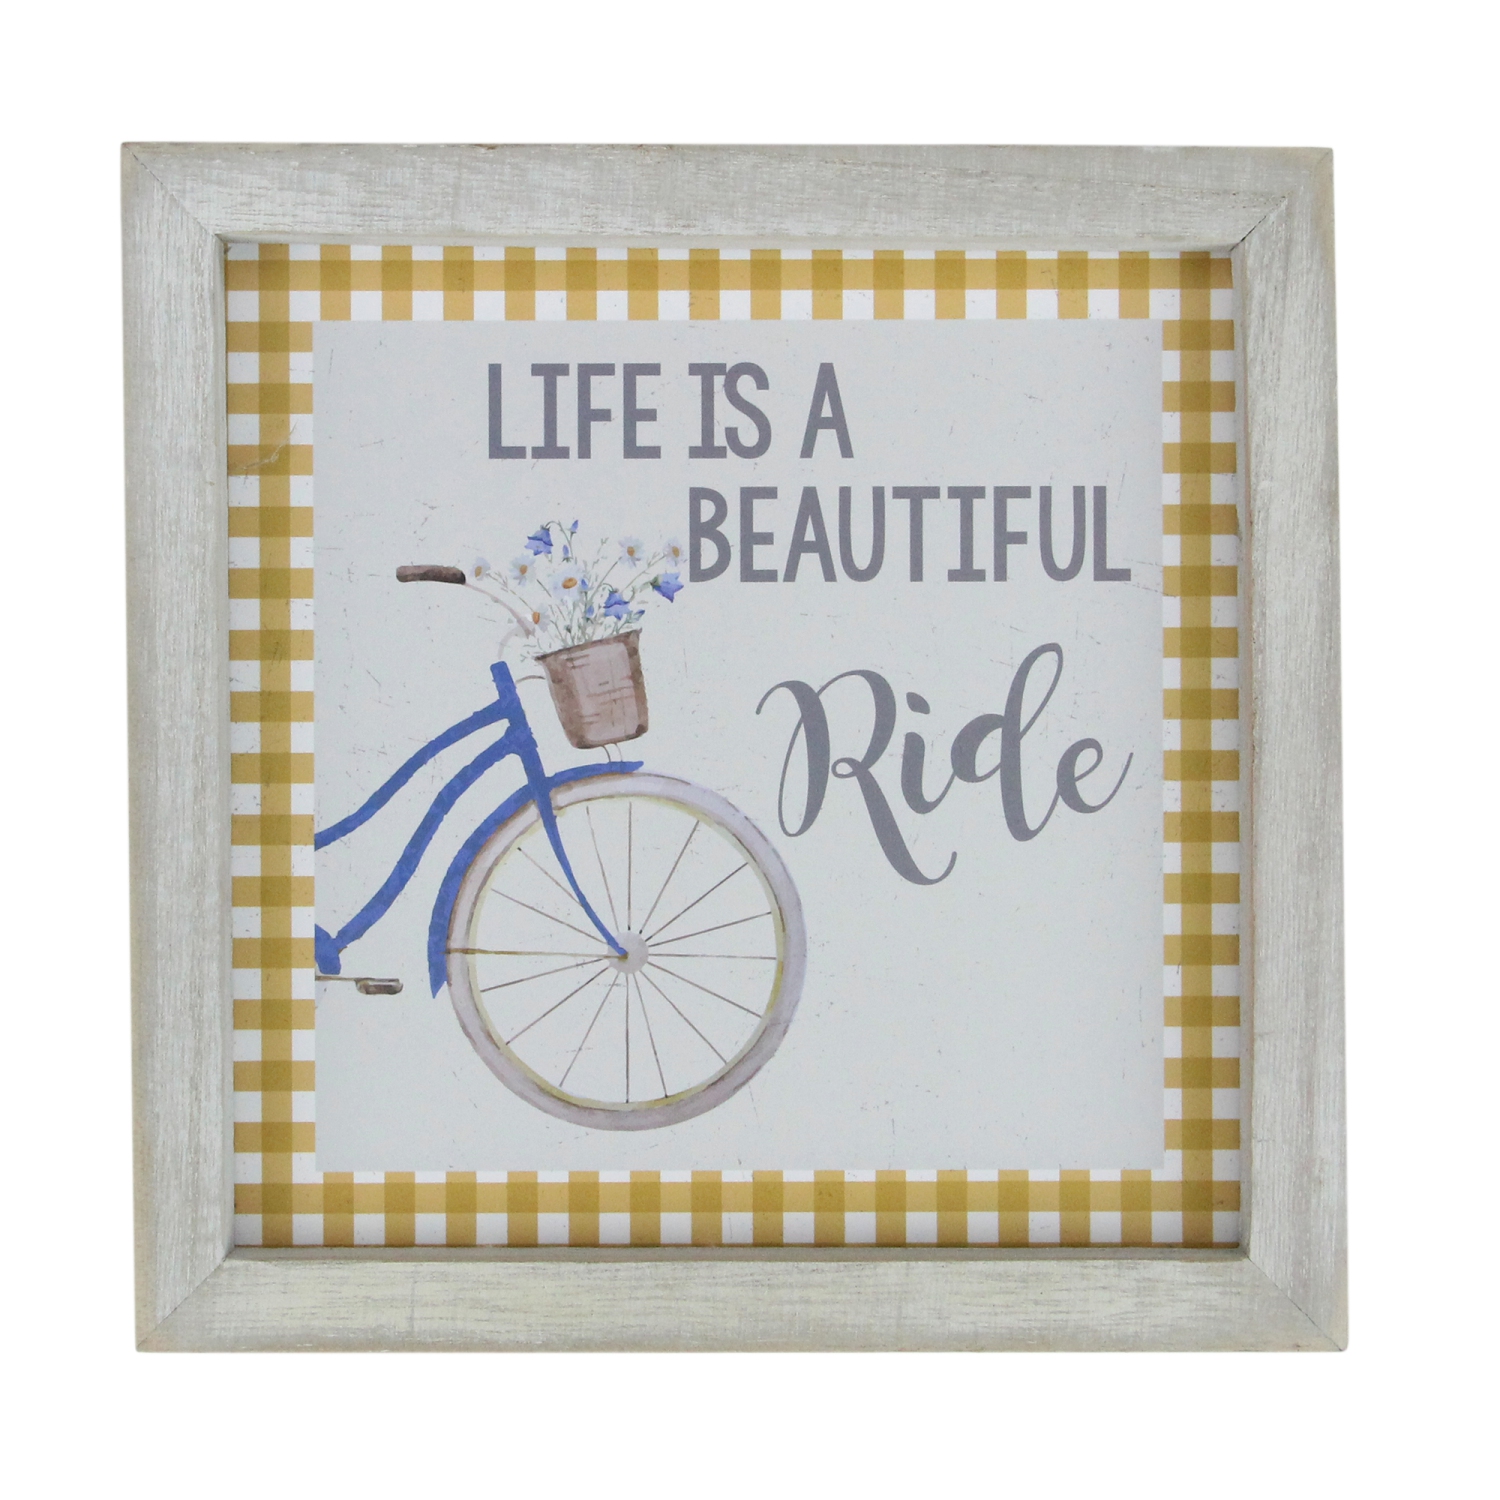 7" Blue And White Vintage Bicycle "Life Is A Beautiful Ride" Plaid Accent Wall Decor